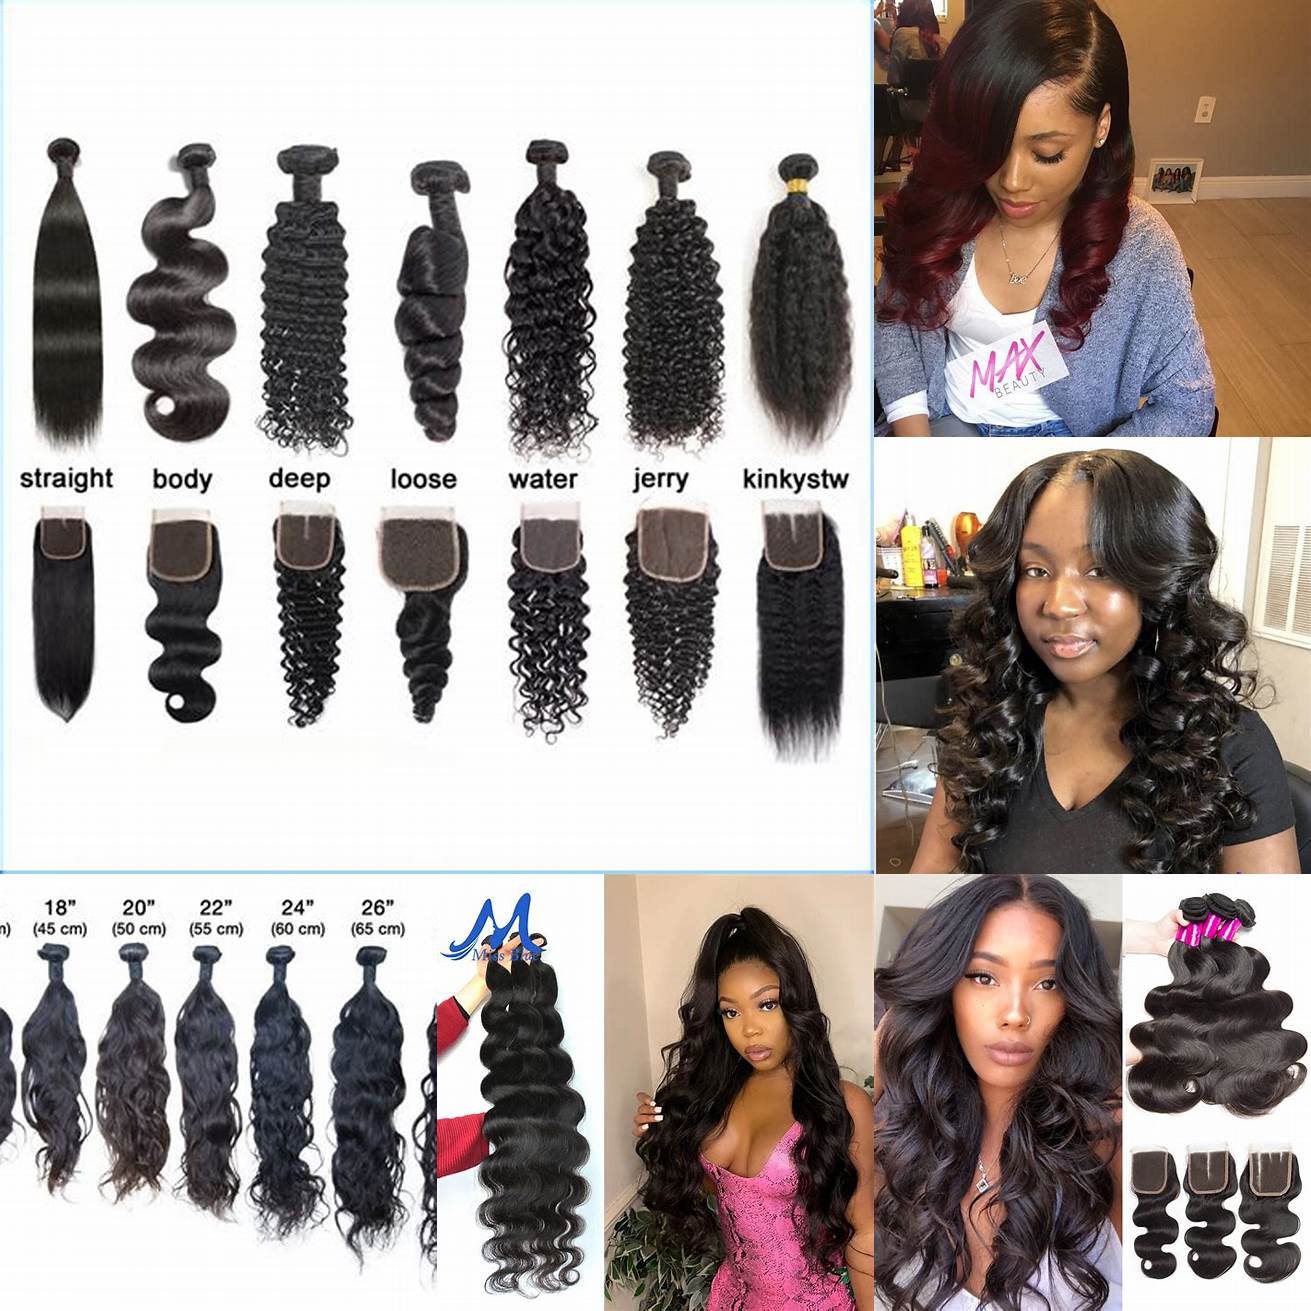 Consider Weave Choose a weave that meets your preferences